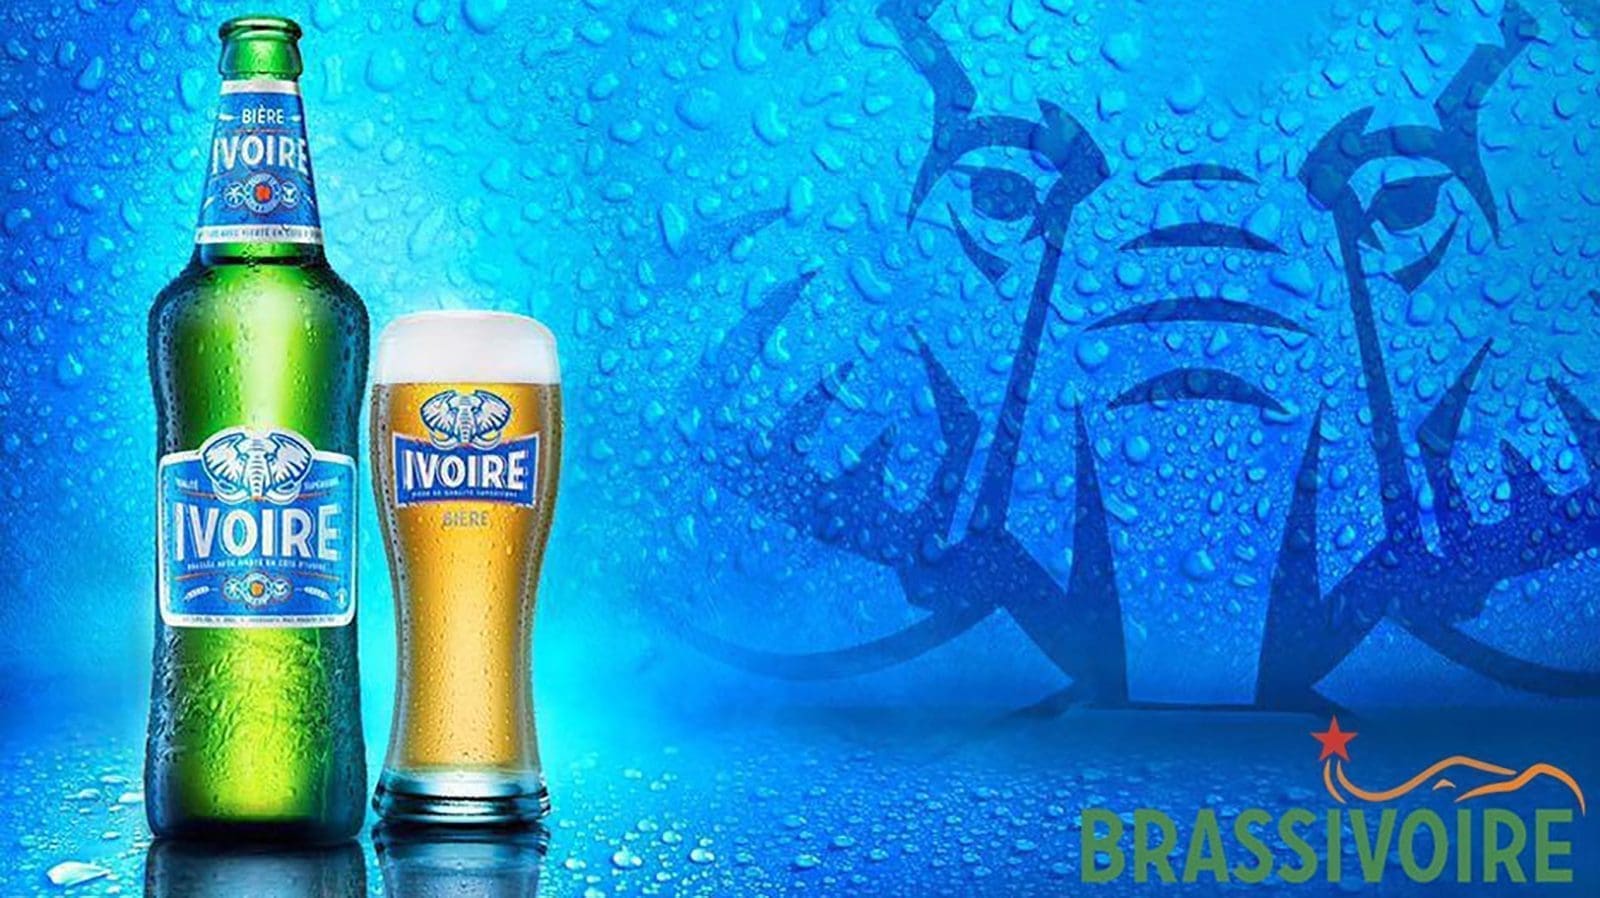 Heineken raises glass to 5 years of quenching Ivorian’s thirst with locally made beer brand Ivoire